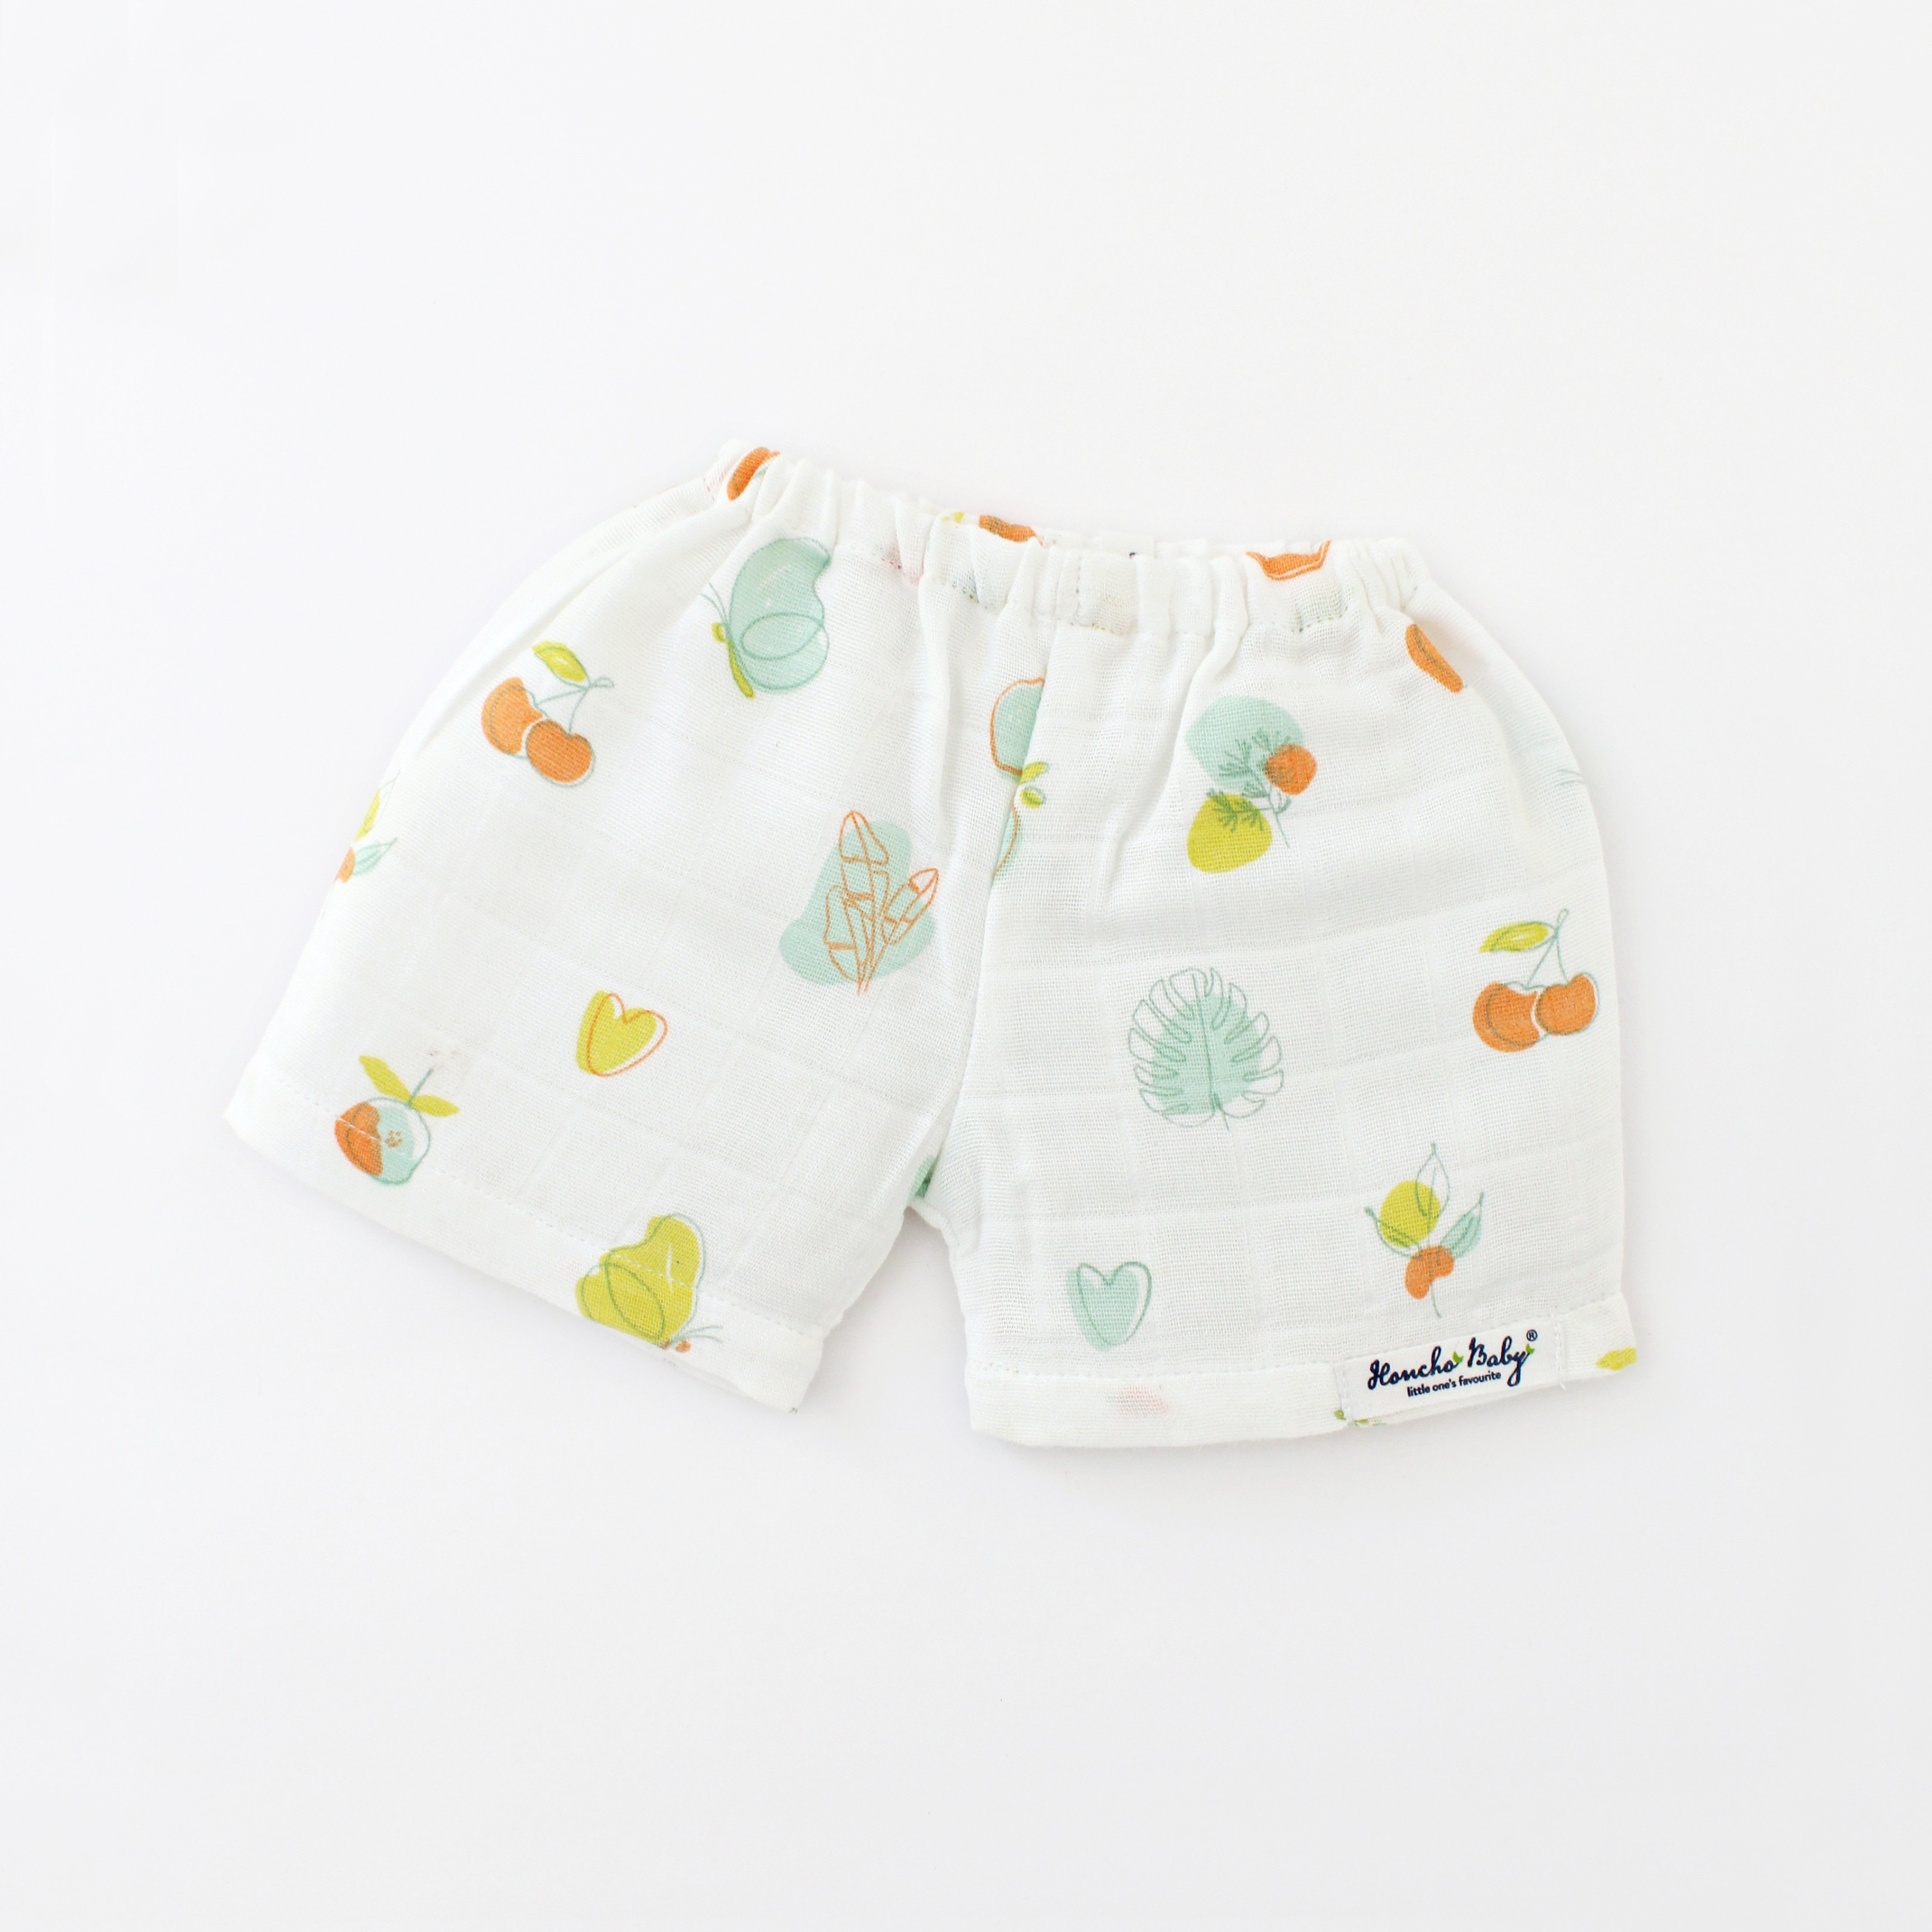 Tropical Magic - Unisex Shorts - 1 Pack ( 0 to 3 years )